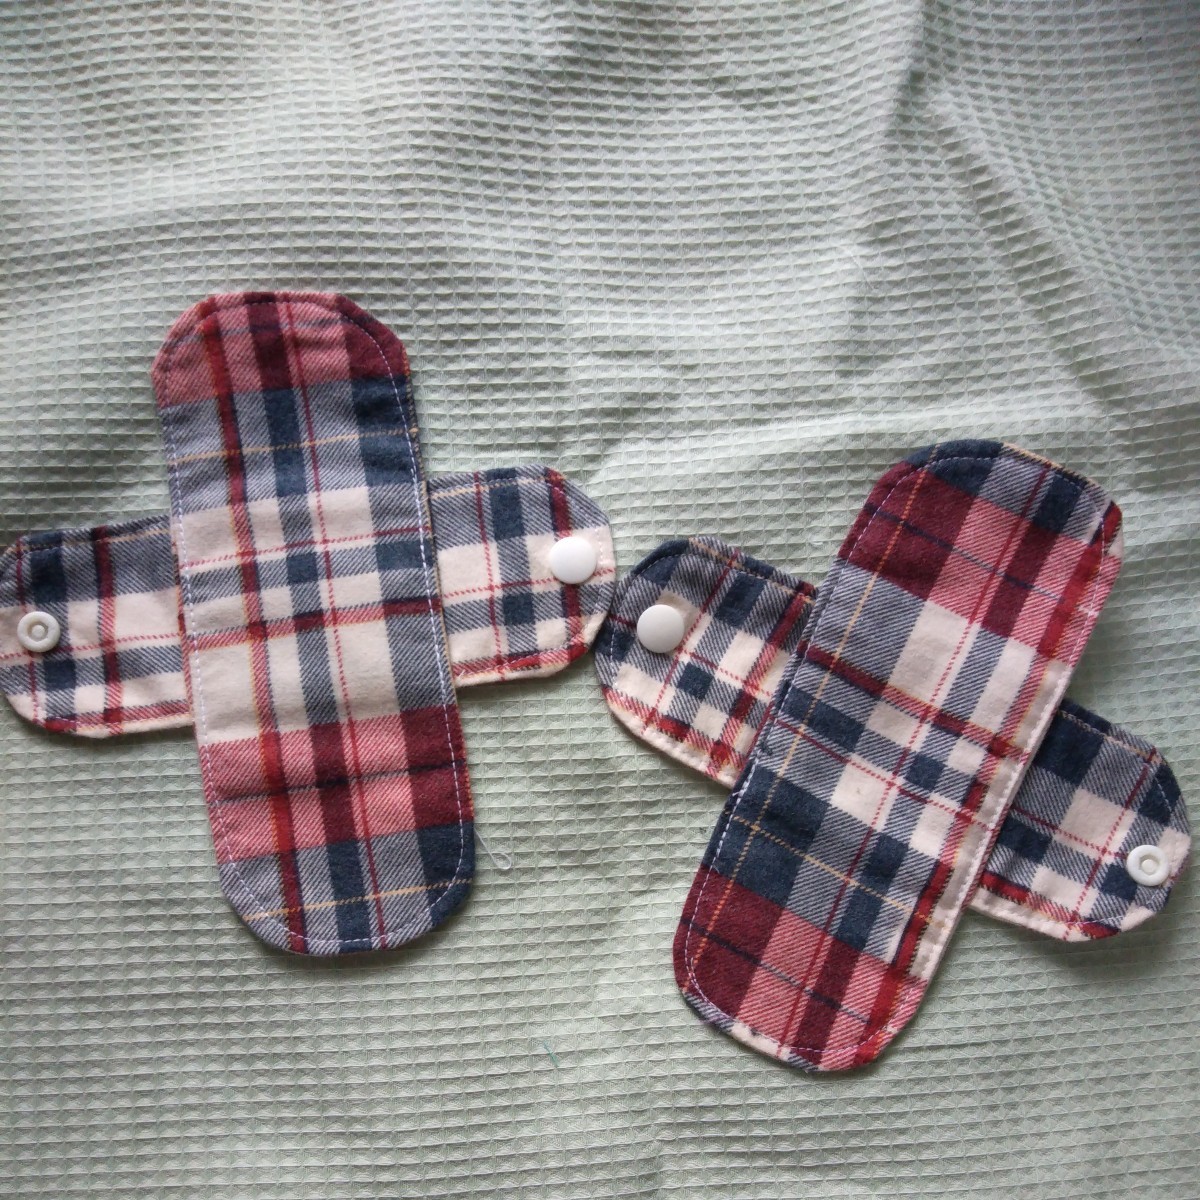  liner hand made 2 sheets approximately 7×7,5cm about nappy thin cotton check pattern 